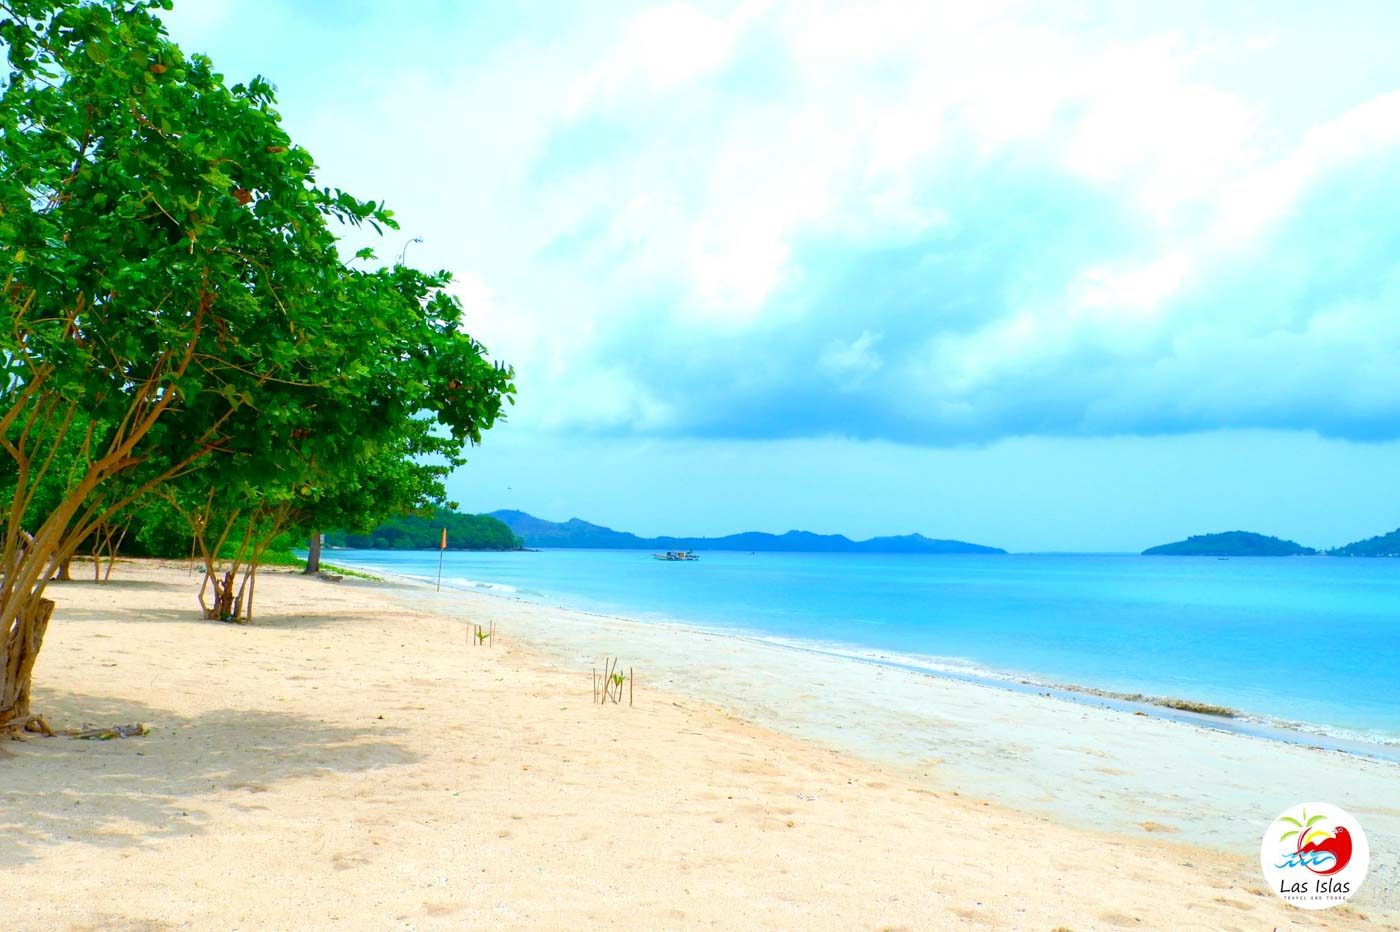 WHITE BEACH. Just one of Sicogon's fine stretches of sand. Photo courtesy of Las Islas Travel and Tours 